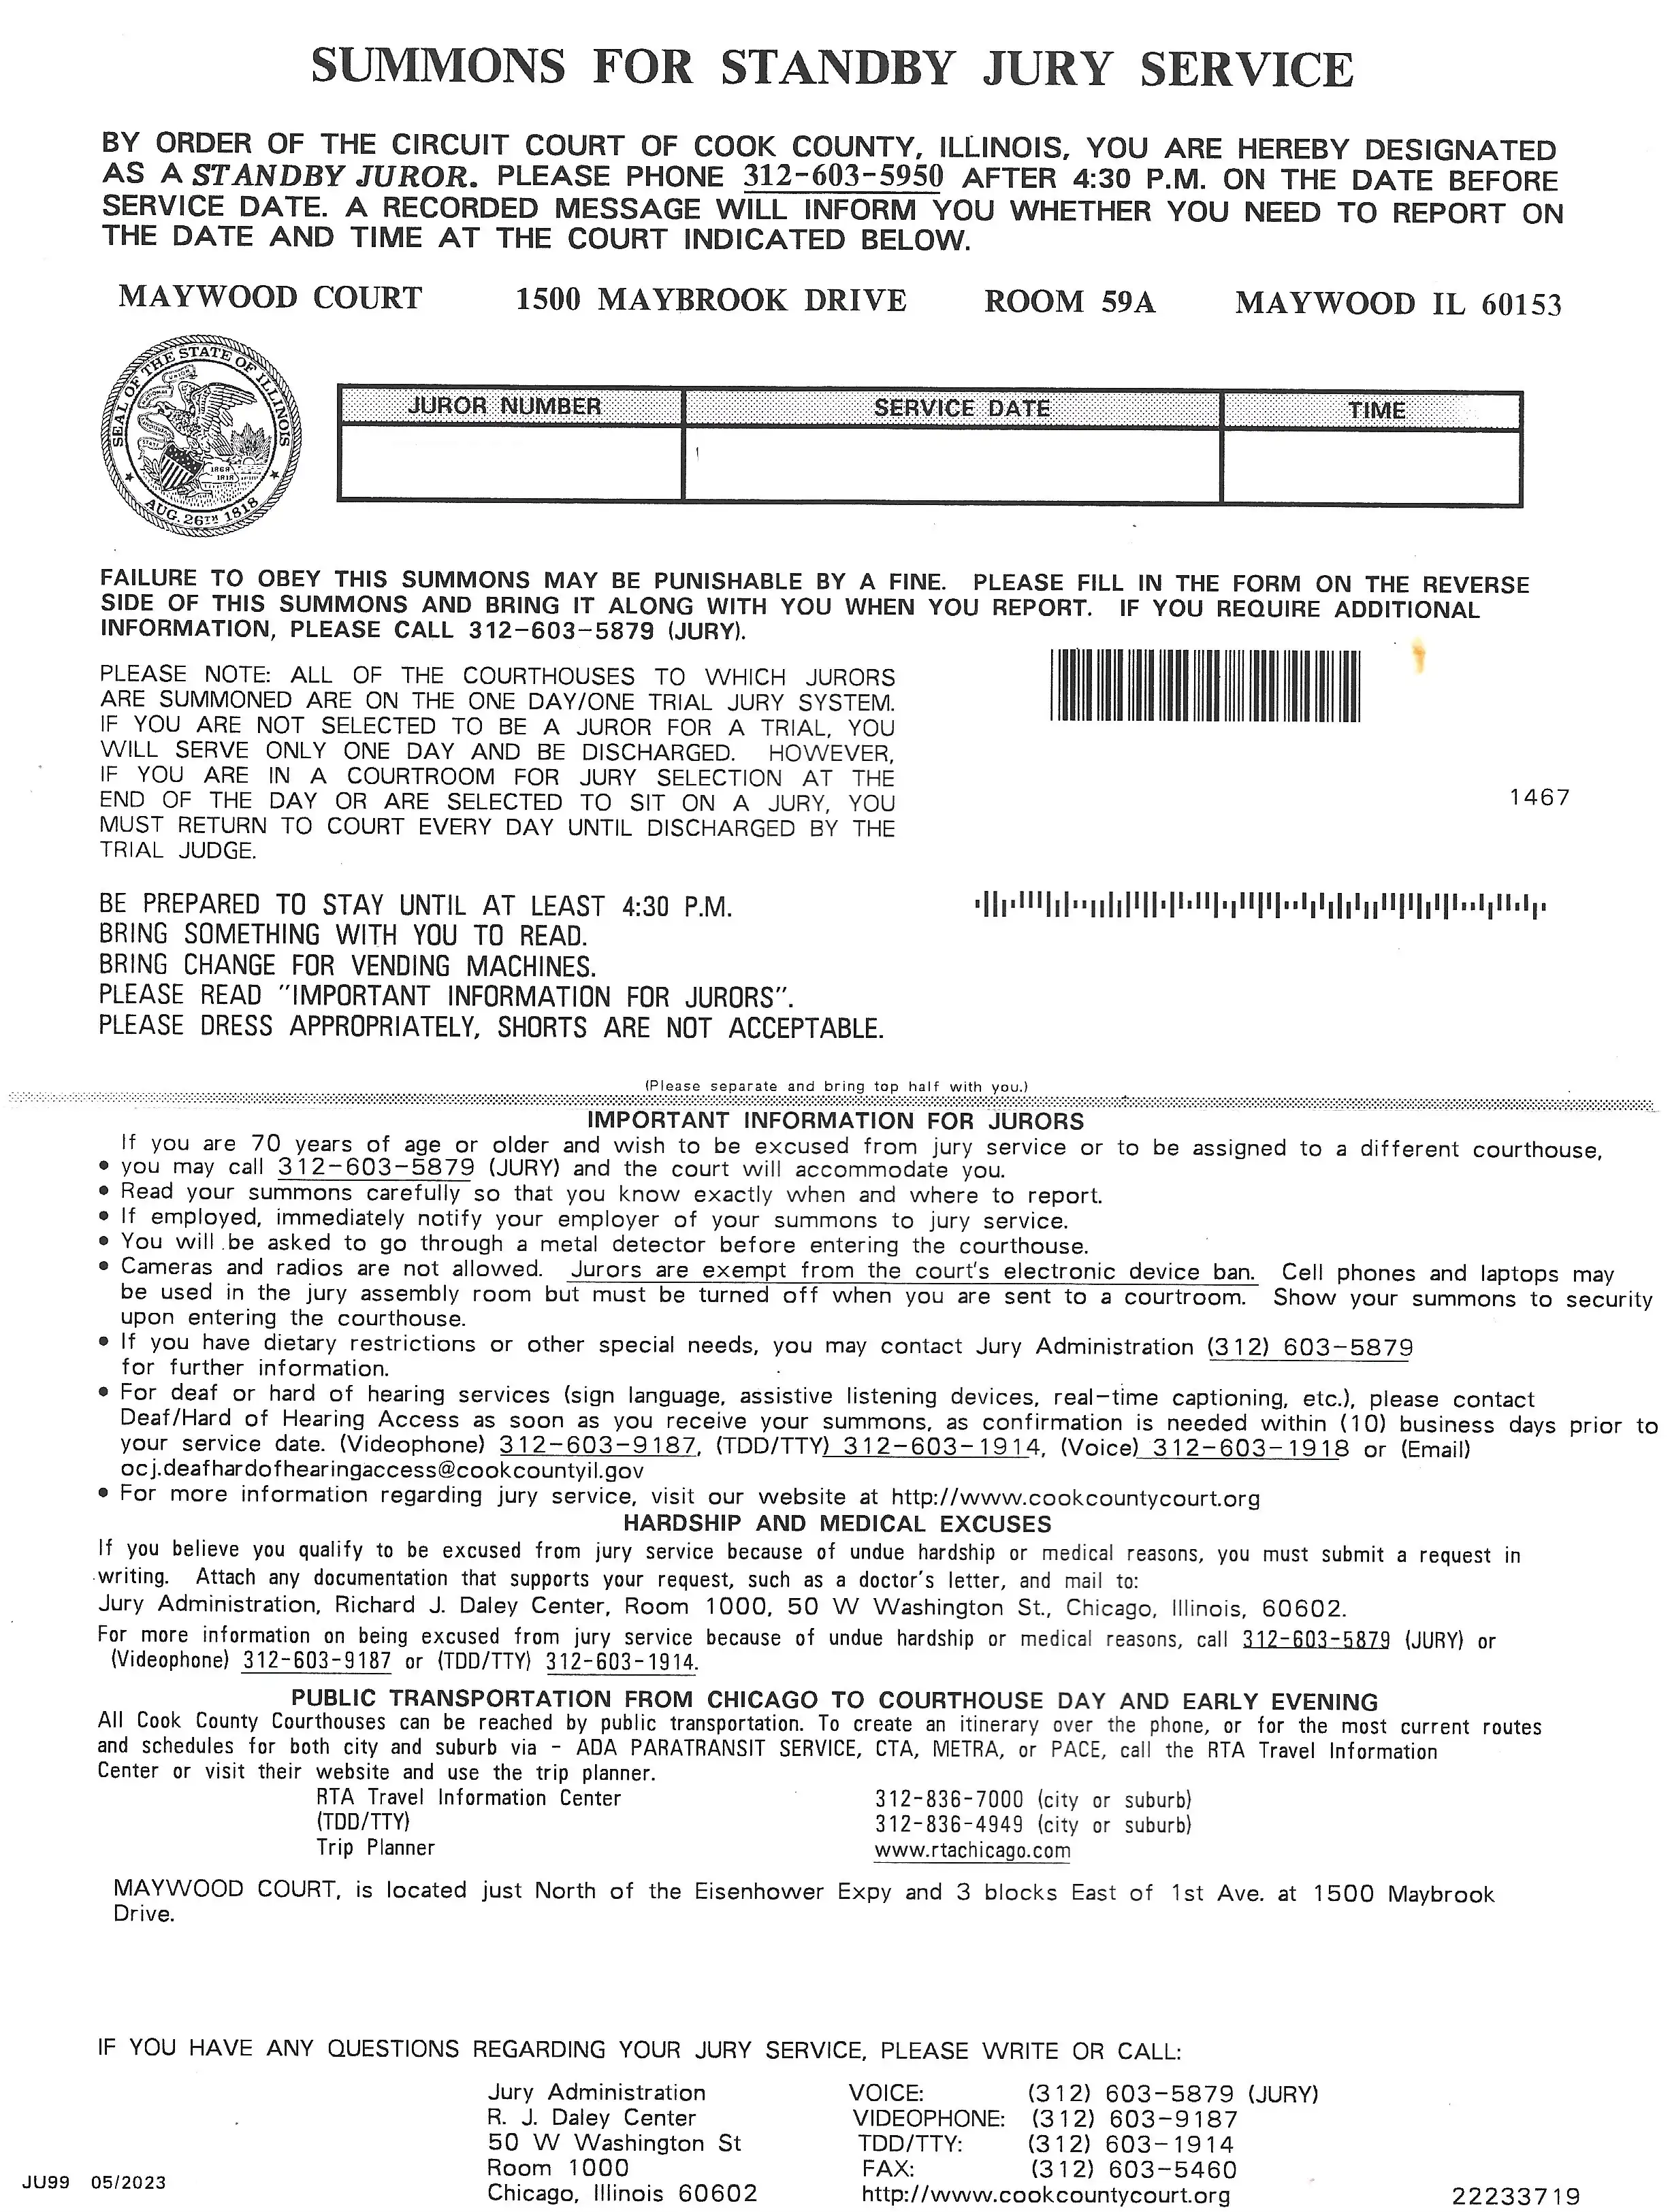 Summons For Standby Jury Service Letter Cook County Illinois Front